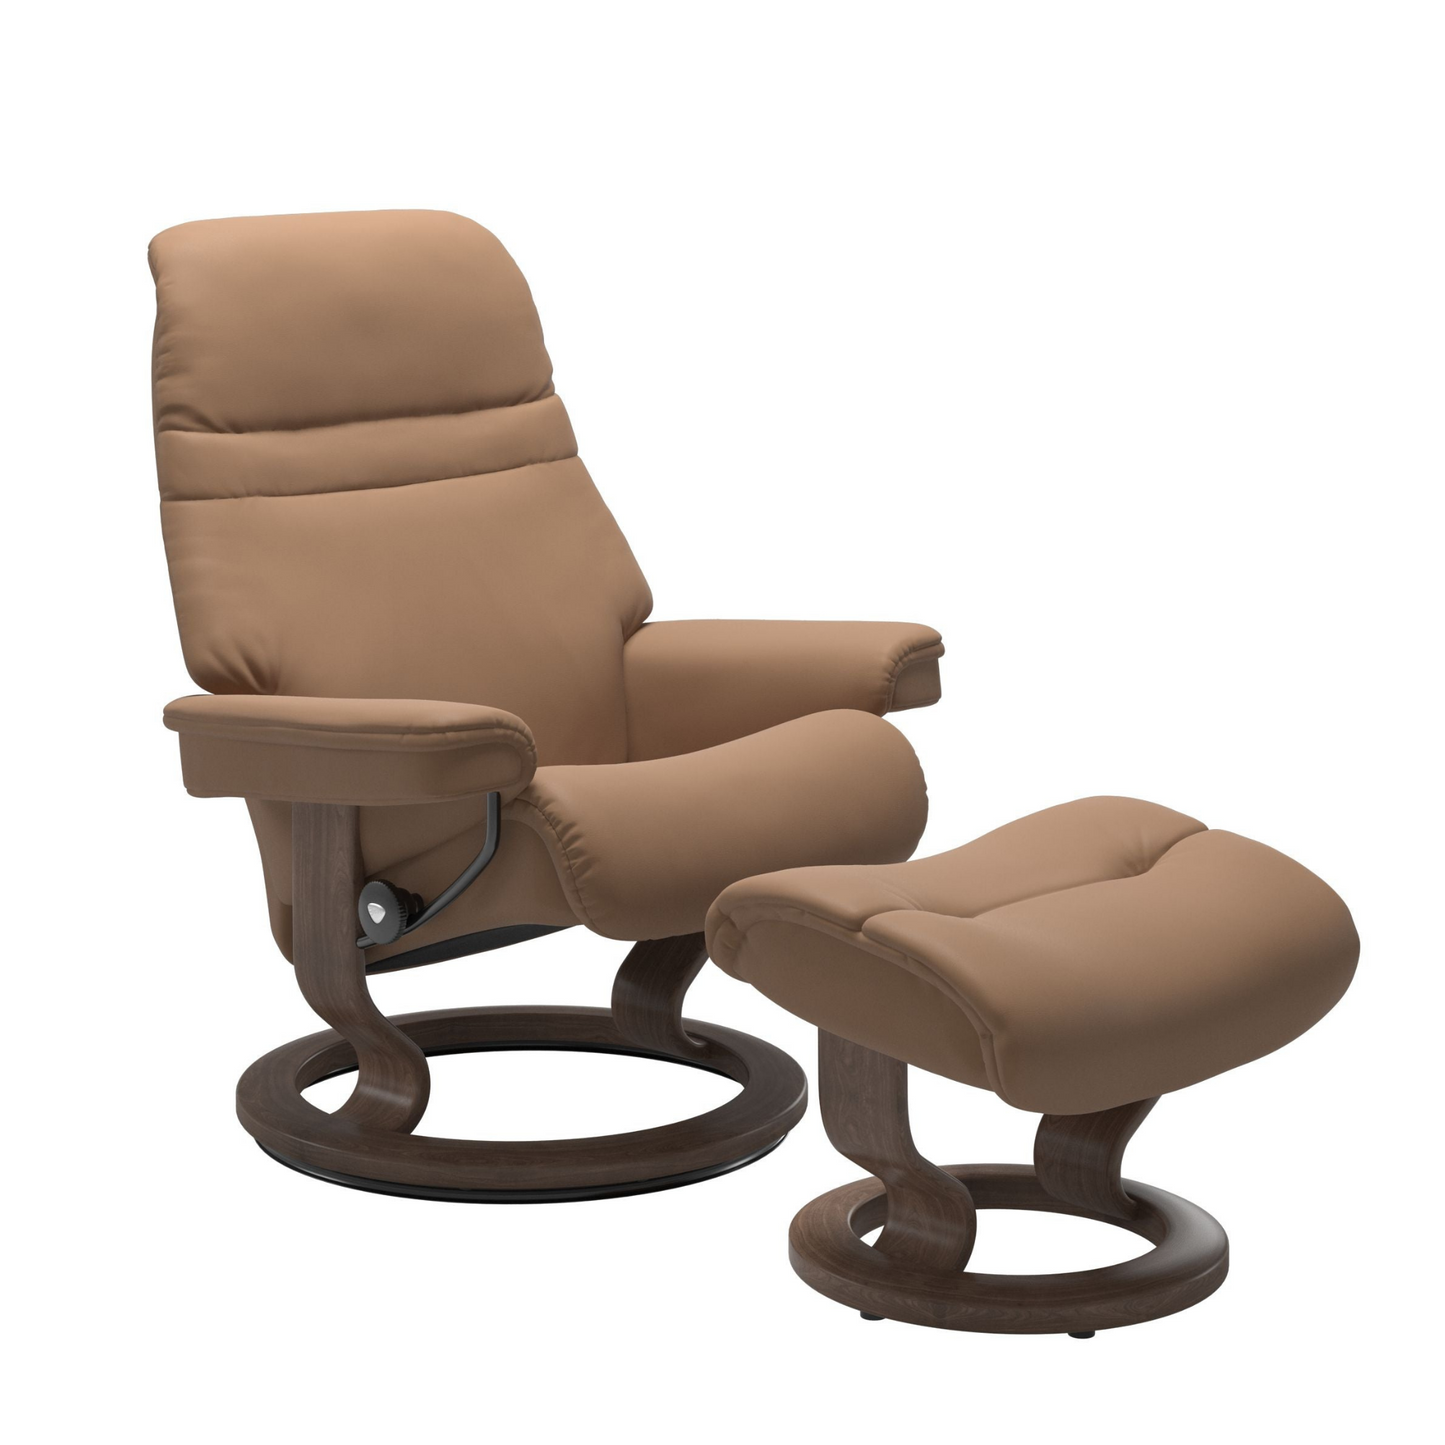 Sunrise Large Recliner Chair & Stool Classic Base by Stressless